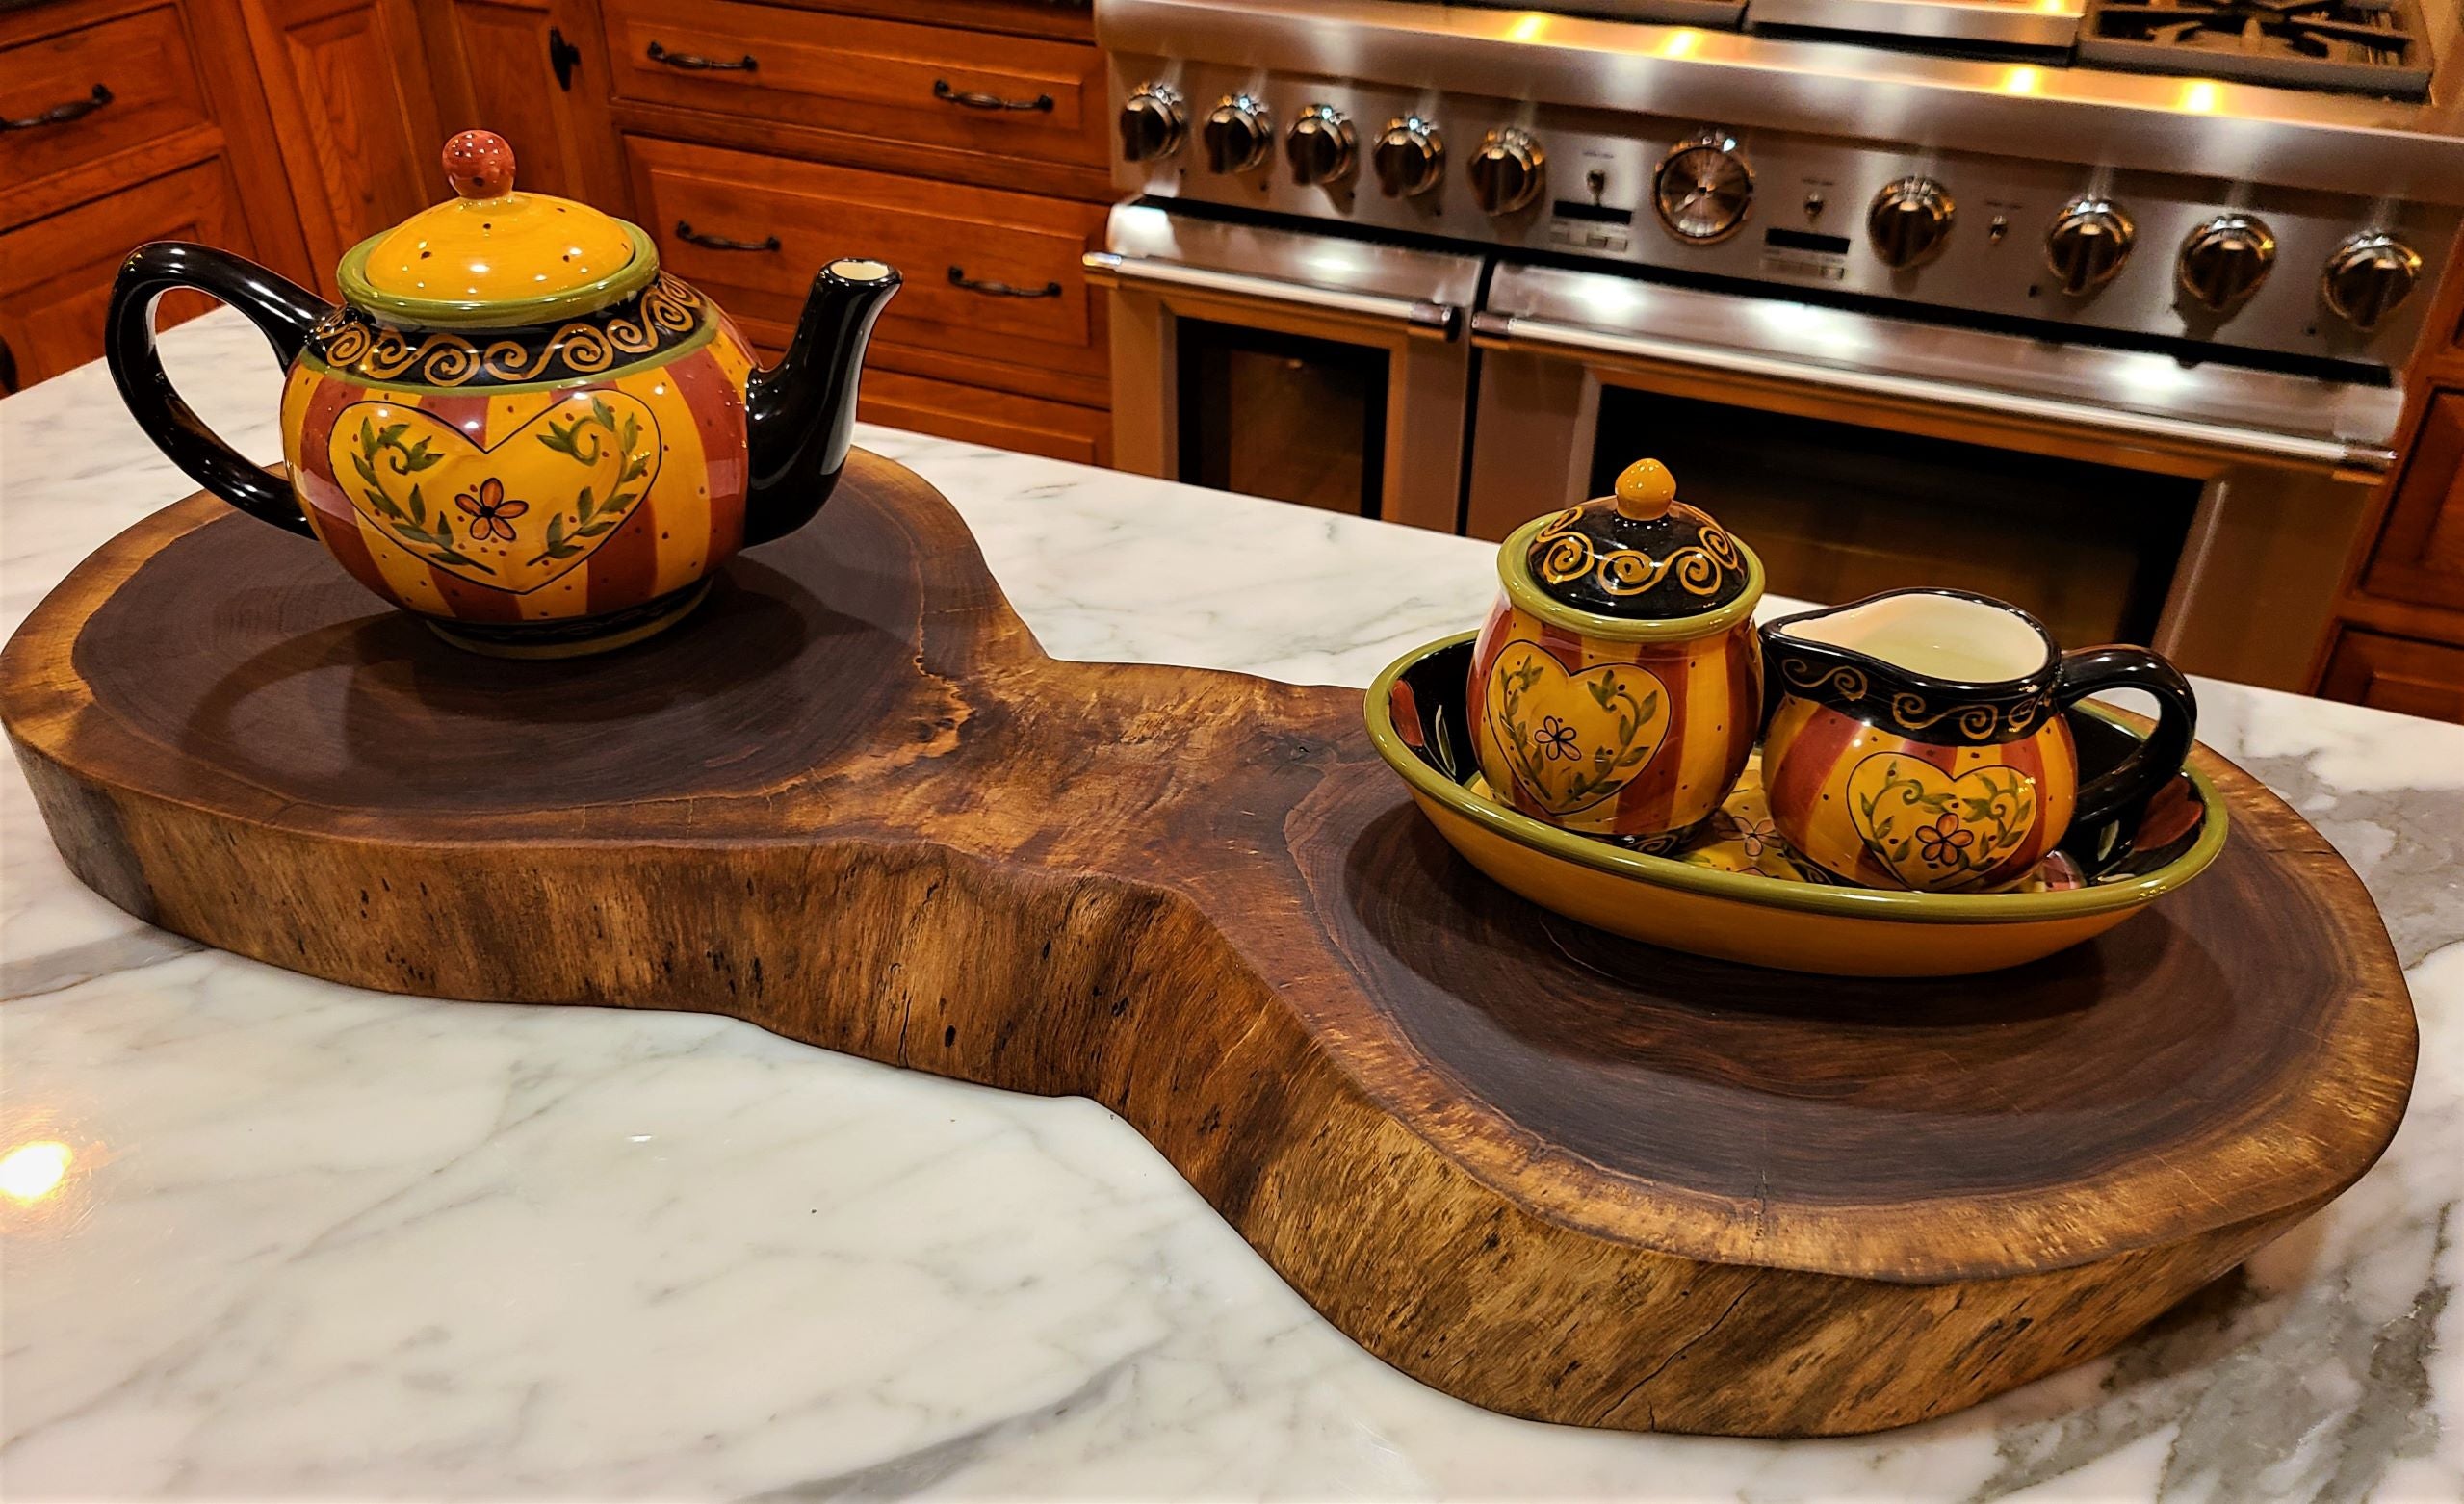 Black Walnut double crosscut used as a kitchen island centerpiece or large charcuterie board. Charcuterie/ Grazing Solid Wood Cutting Board made in Lancaster Pennsylvania USA by ZimBOARDS